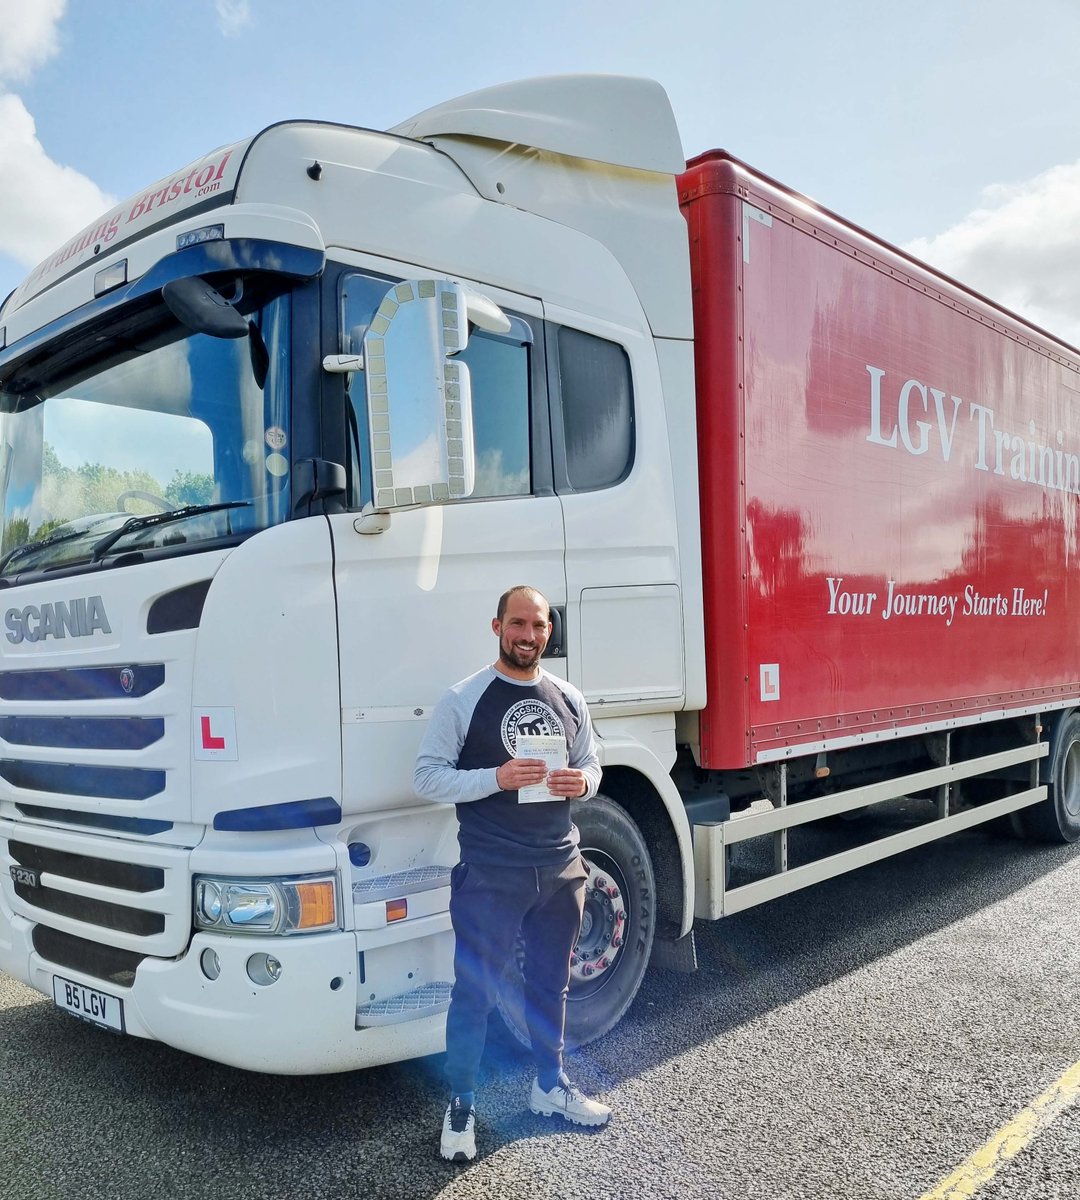 Congratulations to Joe on passing his LGV Cat.C driving test first time. Well done. Keep up the safe driving. We wish you all the very best for the future! LGVTrainingBristol.com #YourJourneyStartsHere